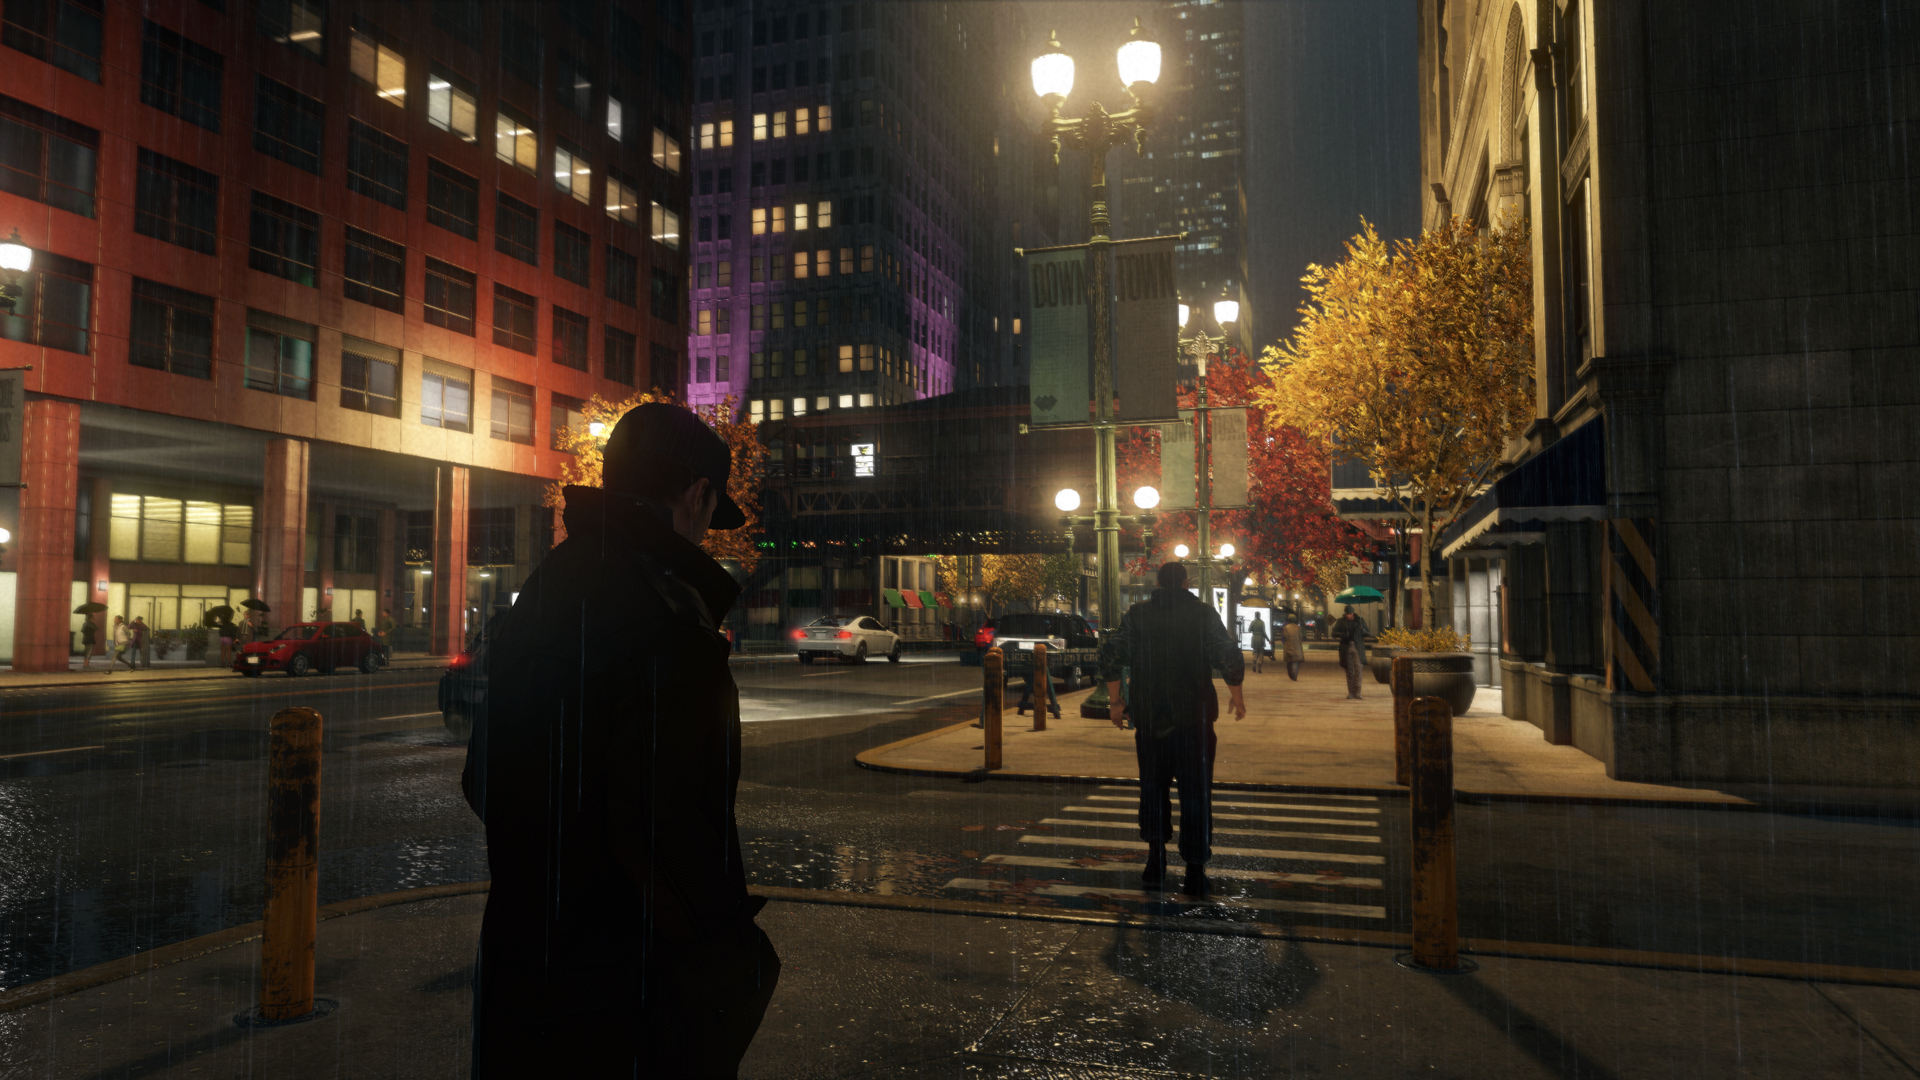 watch_dogs_exe_dx11_20140528_182007_1080p_by_confidence_man-d7k3dga.jpg